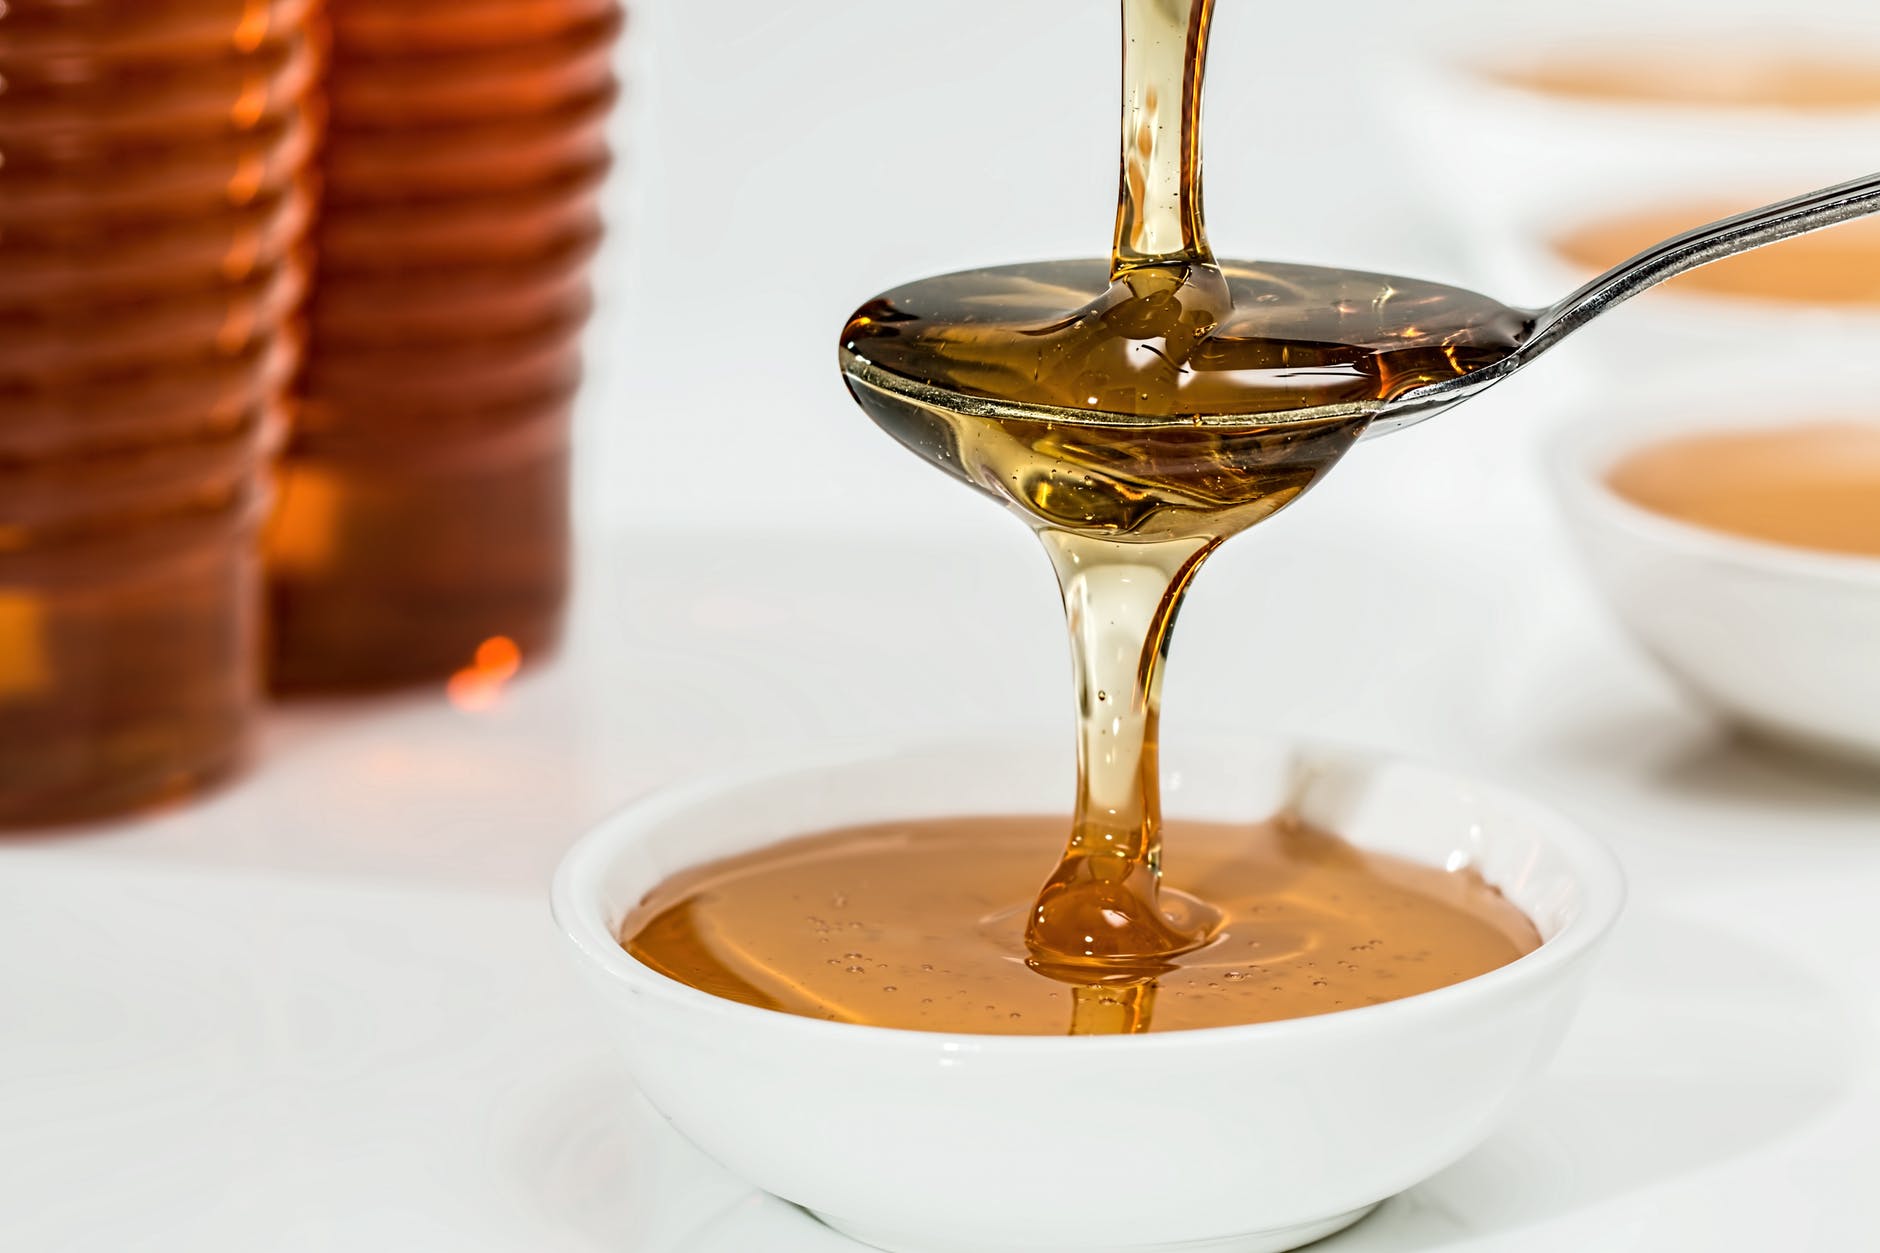 Farm Minister Launches Honey Campaign In Hungary